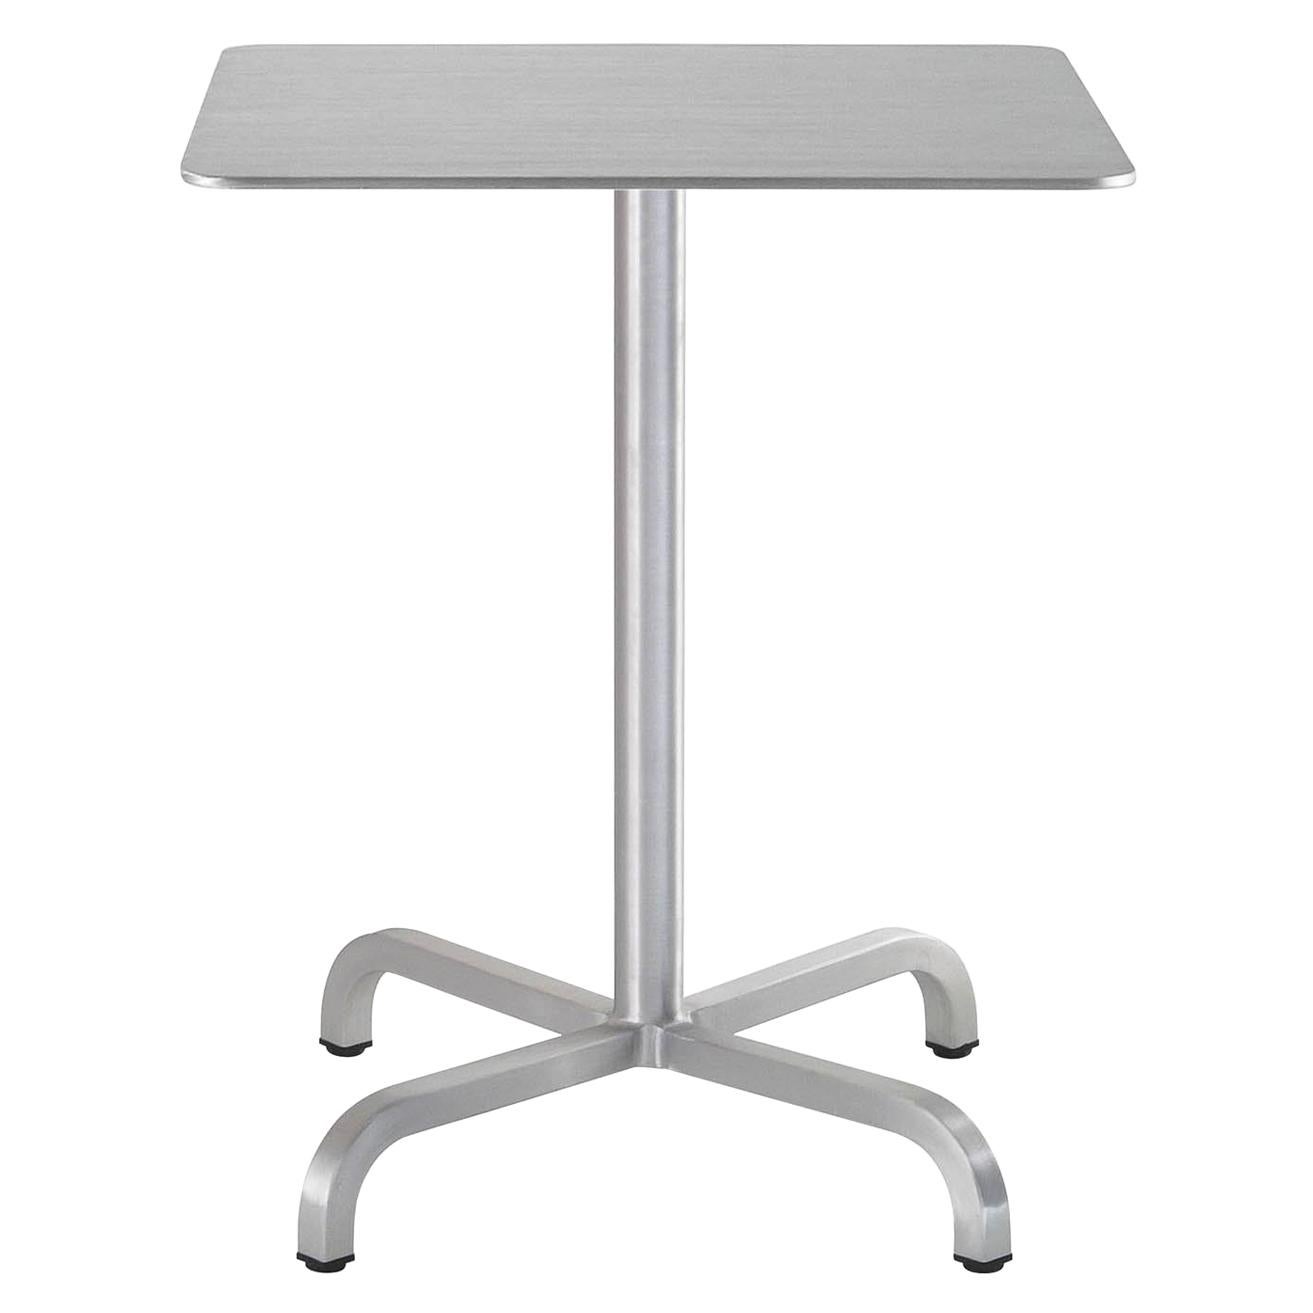 Emeco 20-06 Small Square Café Table in Brushed Aluminum by Norman Foster